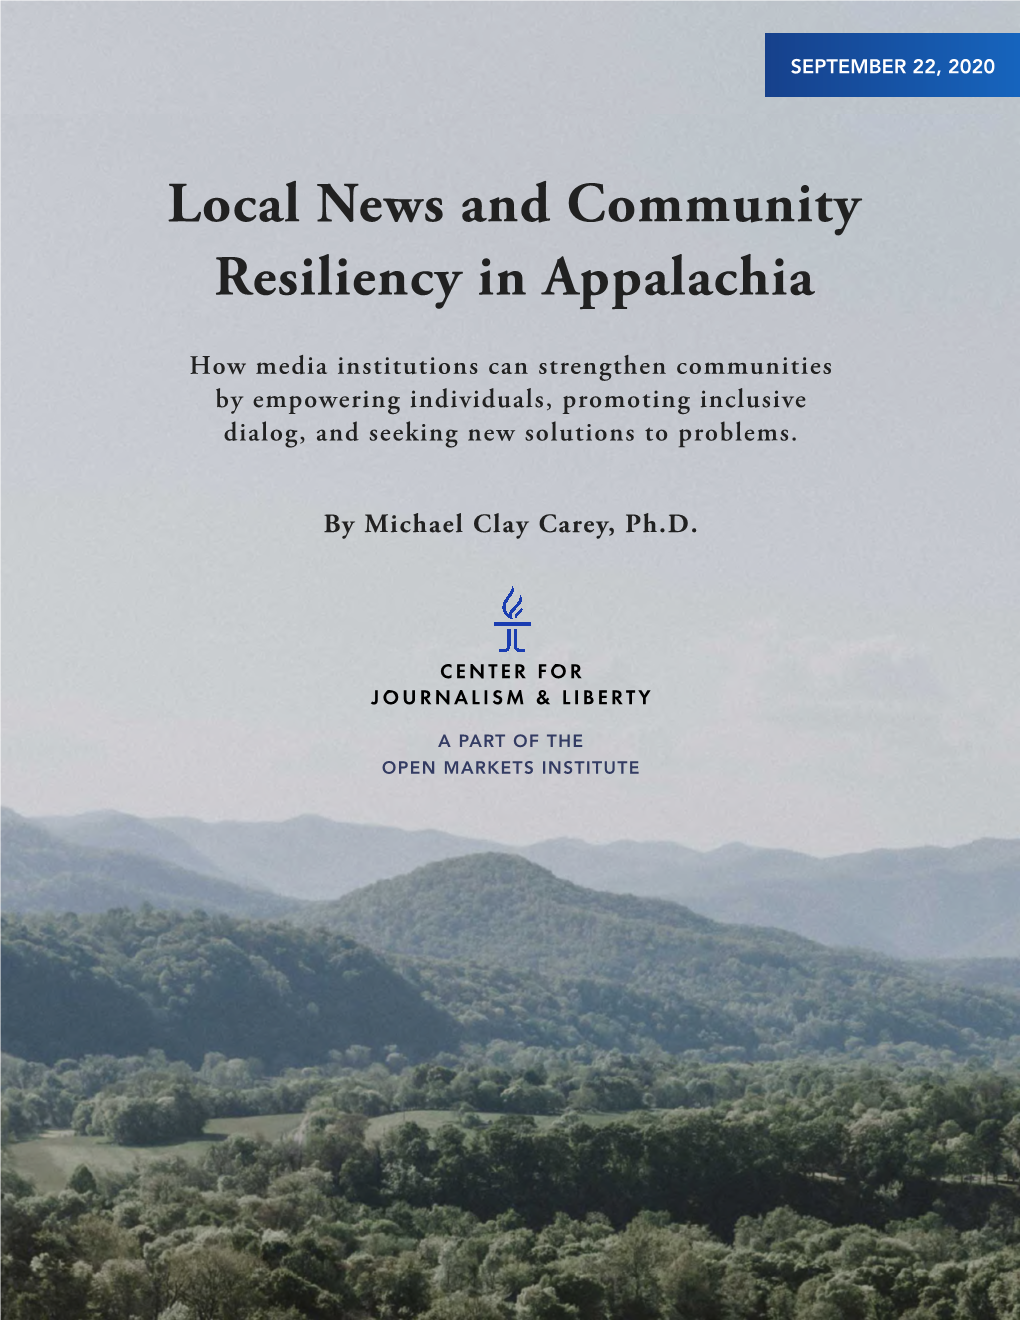 Local News and Community Resiliency in Appalachia